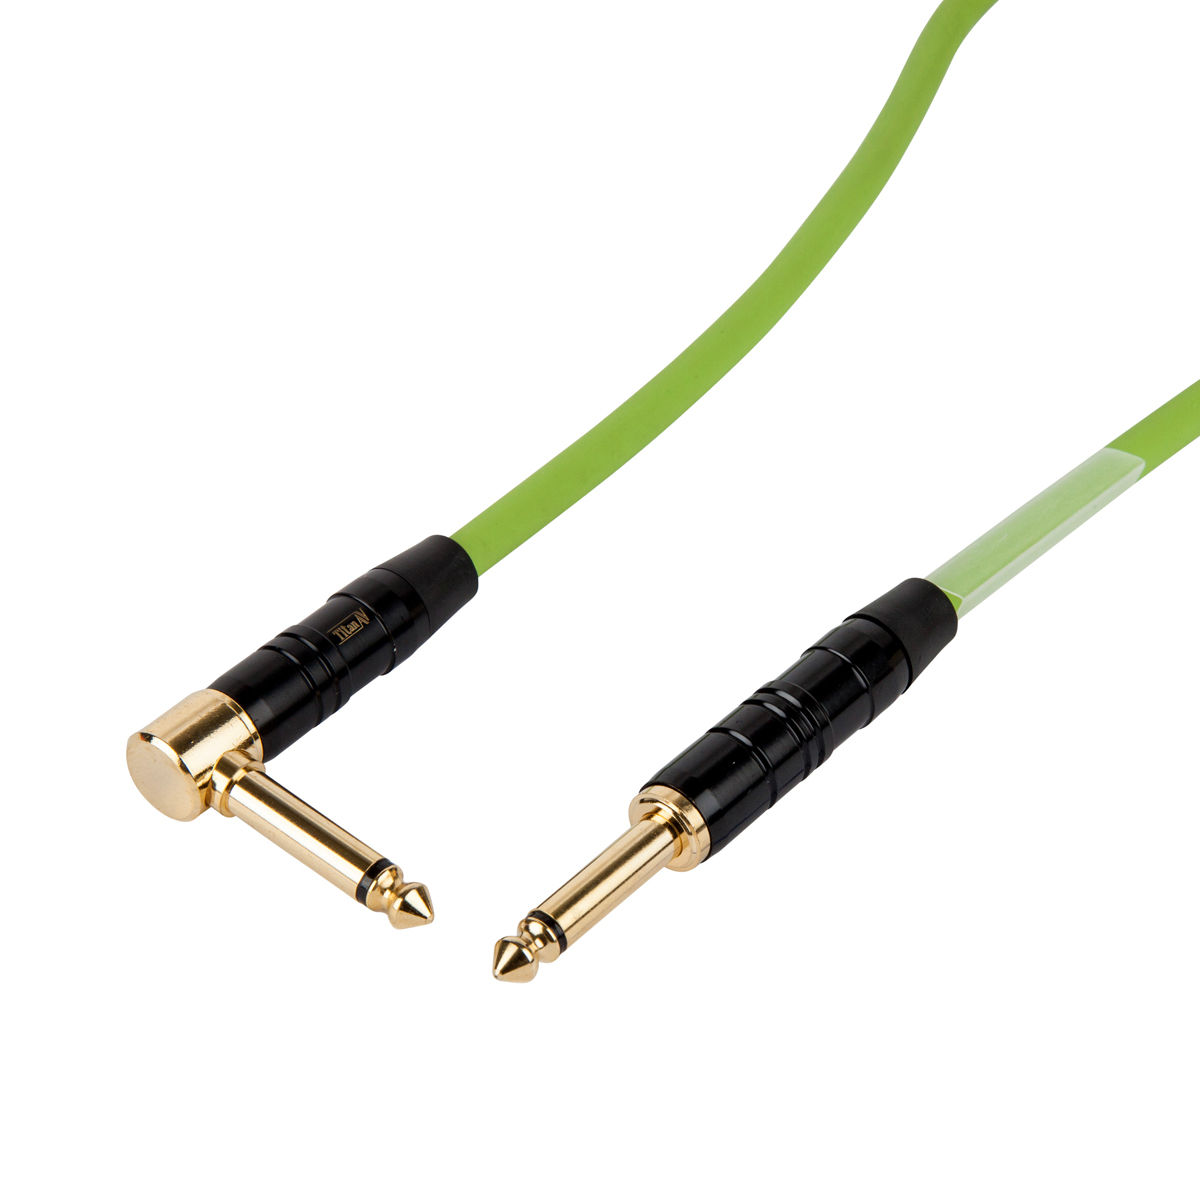 3m Guitar Lead 1/4" to 1/4" Right Angle jack, 6.5mm Green PVC Jacket